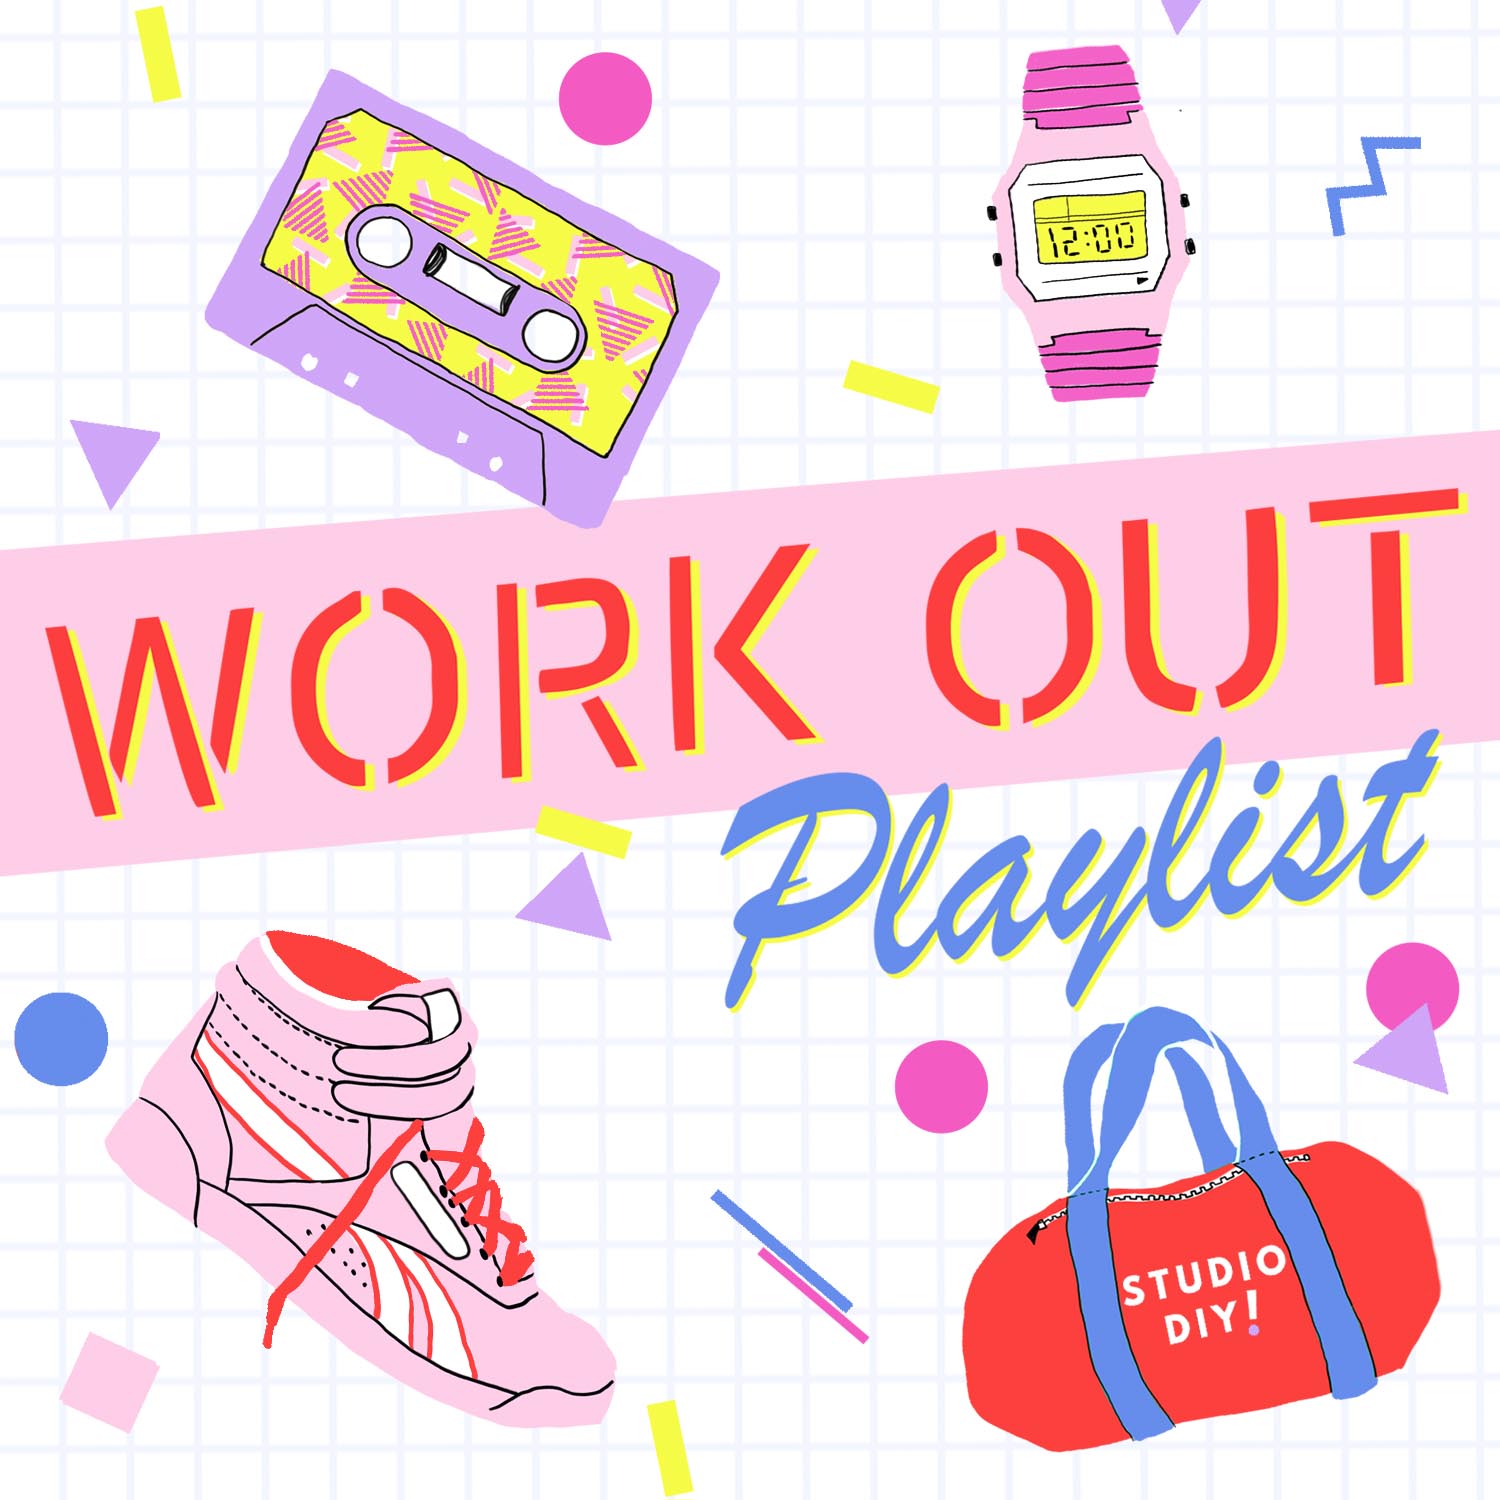 6 Day Workout playlist cover for Gym